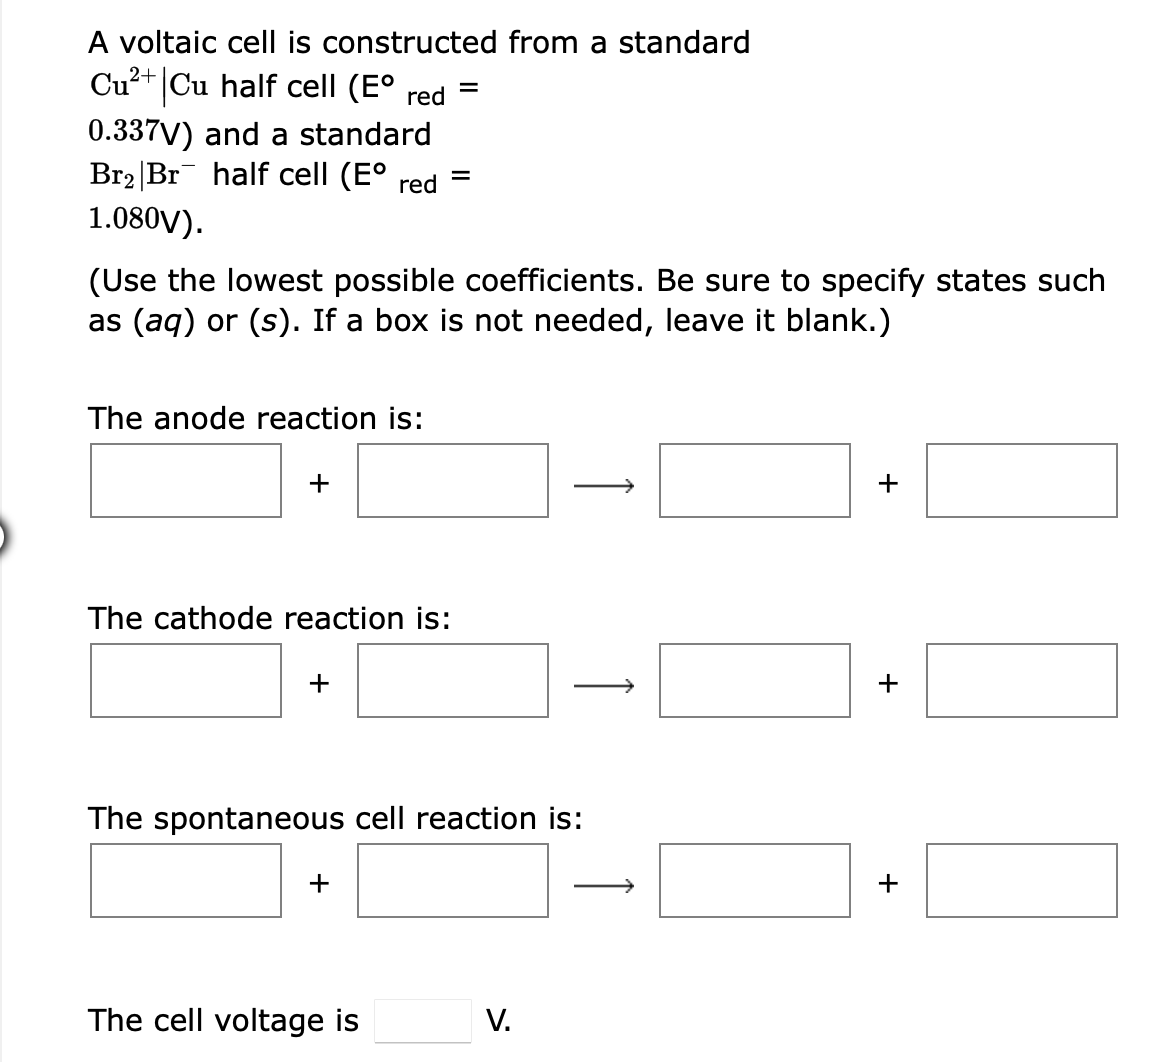 A voltaic cell is constructed from a standard
Cu²+ Cu half cell (E°
red
0.337V) and a standard
Br2 |Br half cell (E°
1.080V).
red
(Use the lowest possible coefficients. Be sure to specify states such
as (aq) or (s). If a box is not needed, leave it blank.)
The anode reaction is:
+
+
The cathode reaction is:
+
The spontaneous cell reaction is:
+
The cell voltage is
V.
+
+
↑
